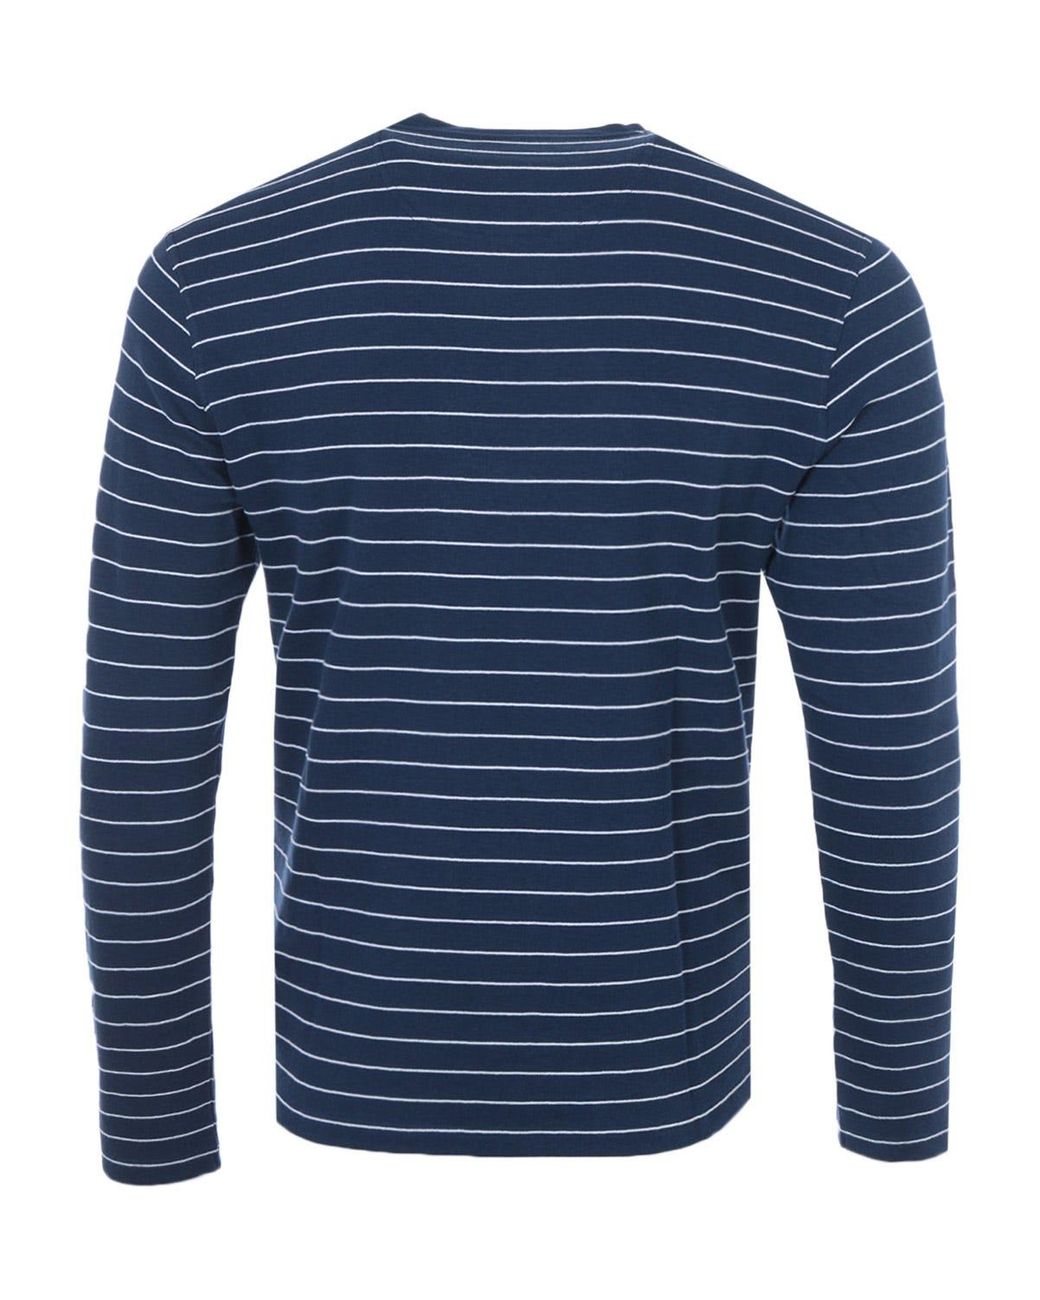 mens long sleeved striped jersey top t shirt by Brave Soul 